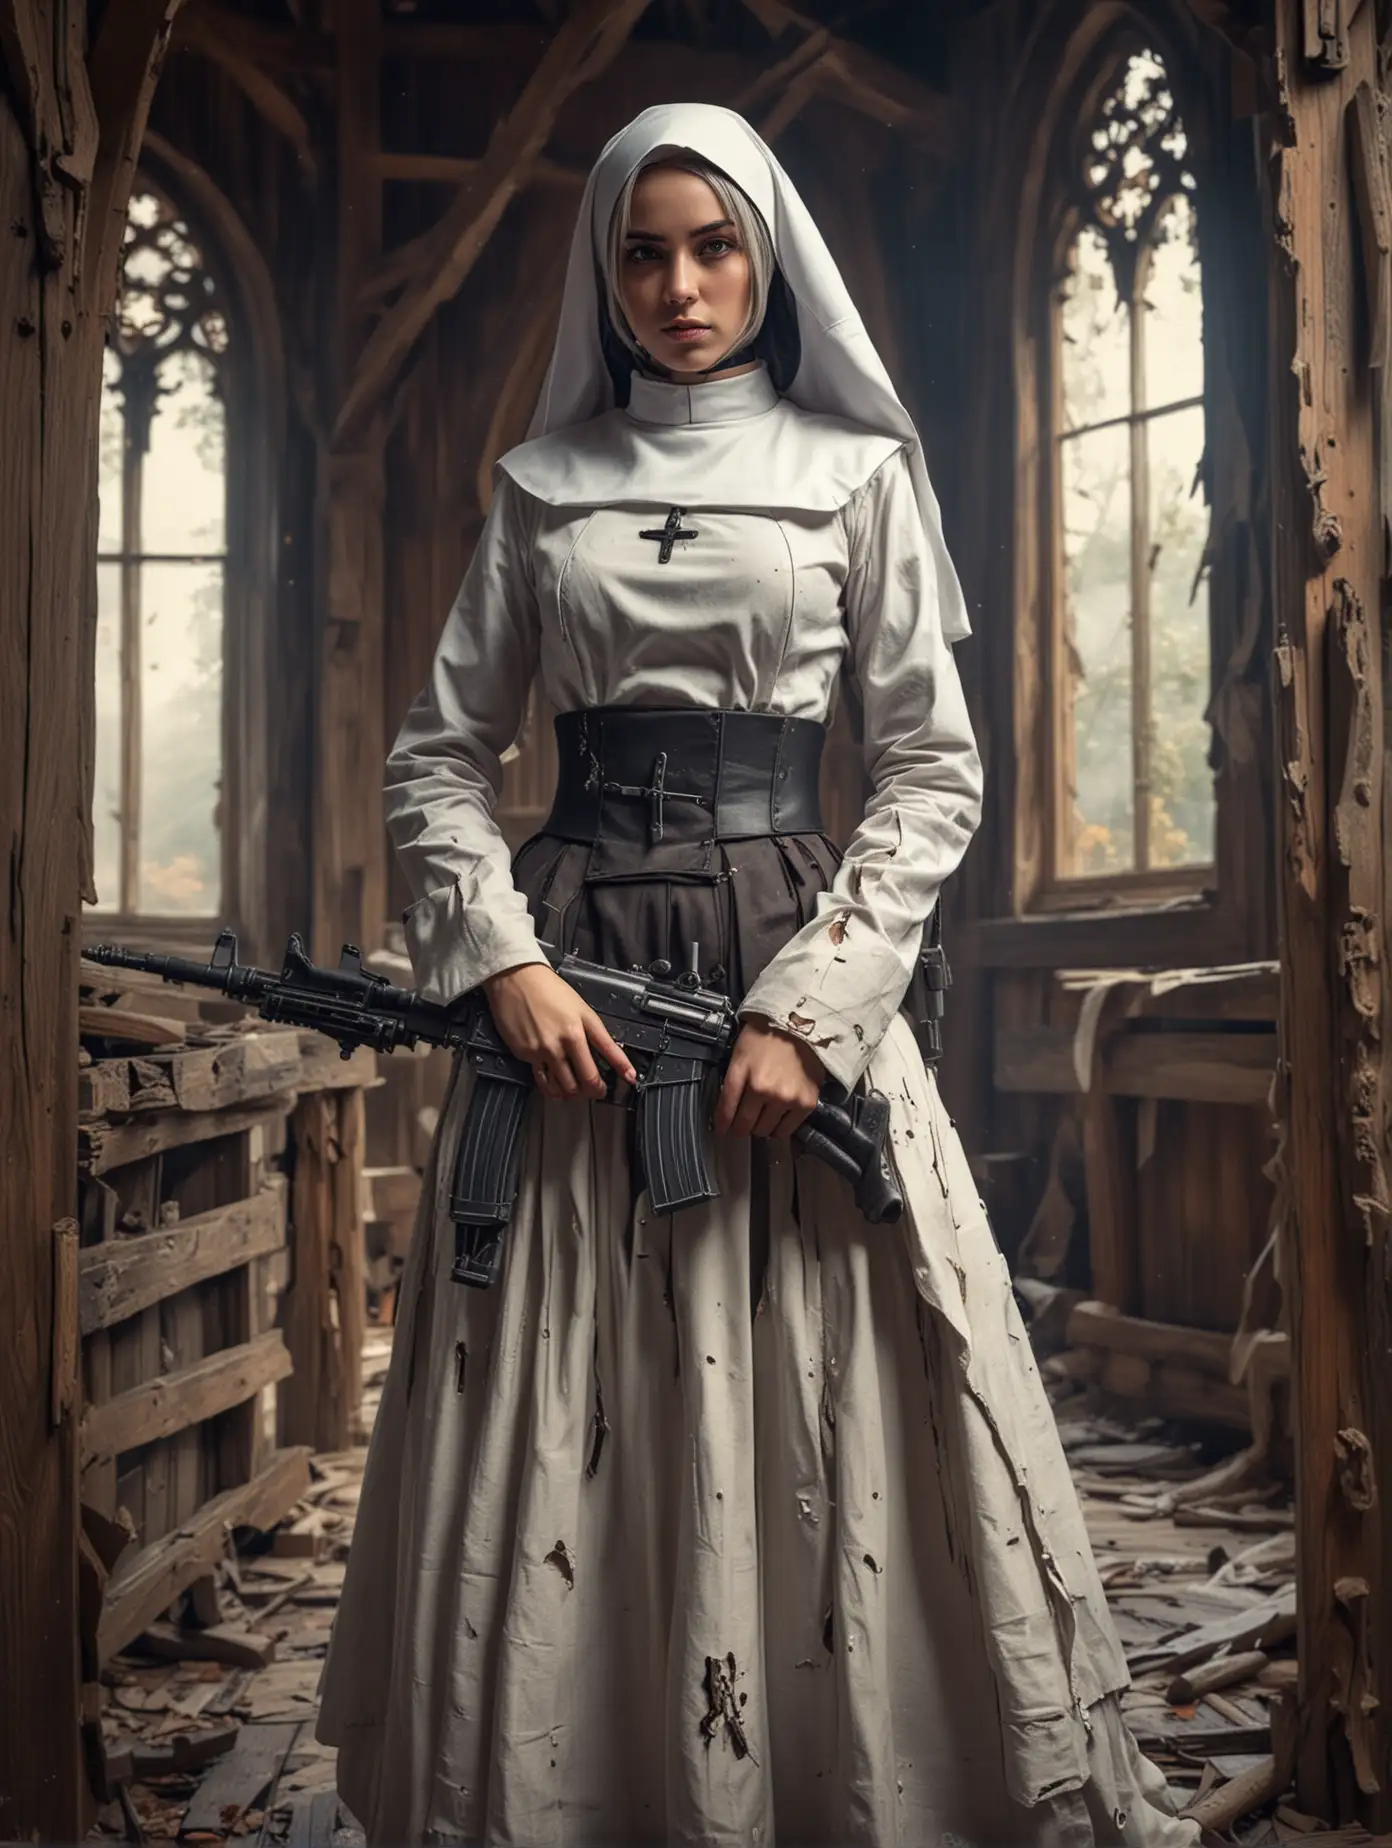 Cosplay-Nun-with-Machine-Gun-in-War-Action-Pose-at-Old-Wooden-Church